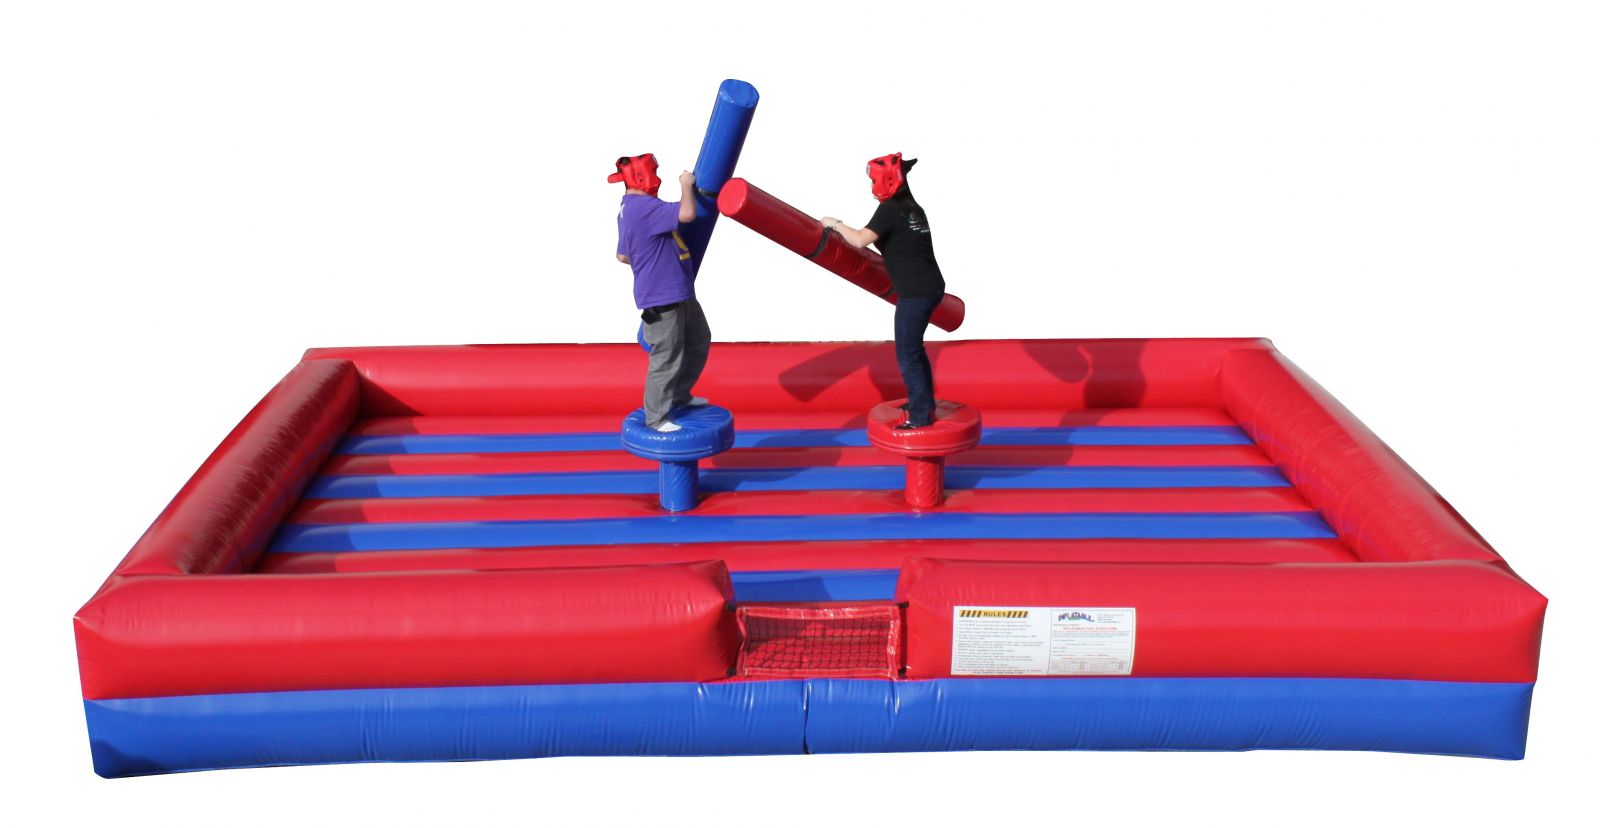 Gladiator Joust Inflatable rental for parties in Austin Texas from Austin Bounce House Rentals